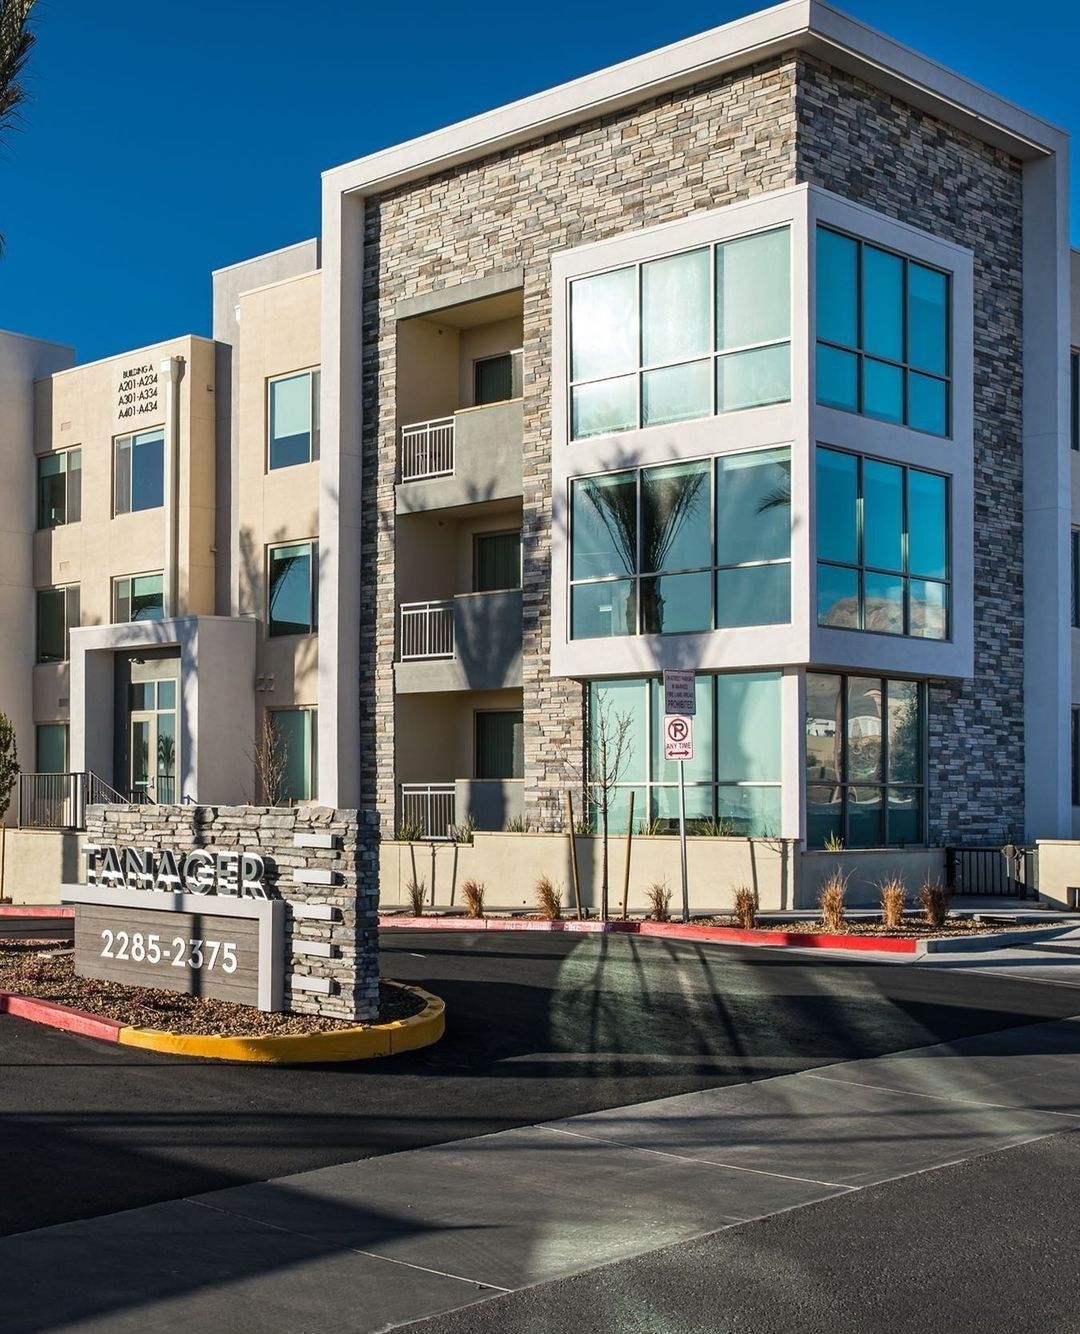 Tanager Apartments in Summerlin, Las Vegas. Photo by Instagram user @tanagerapartments